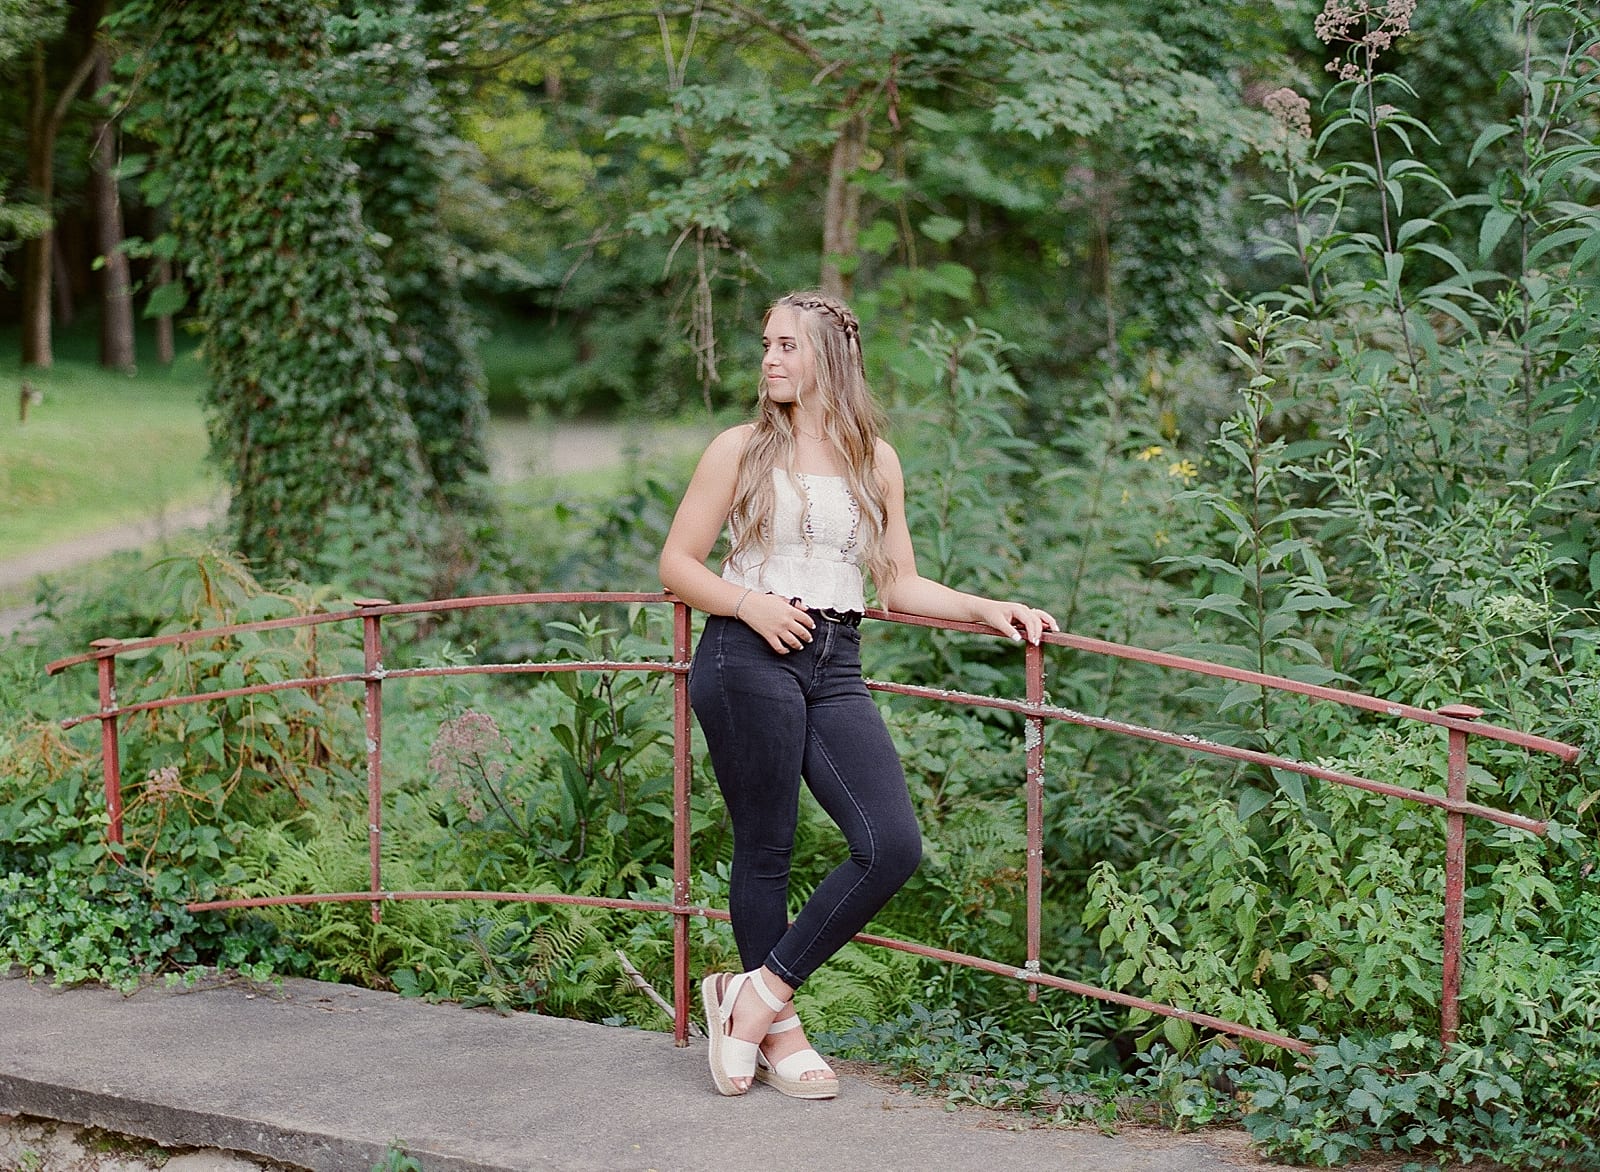 Senior Photos Girl Looking Off Leaning On Rail Photo